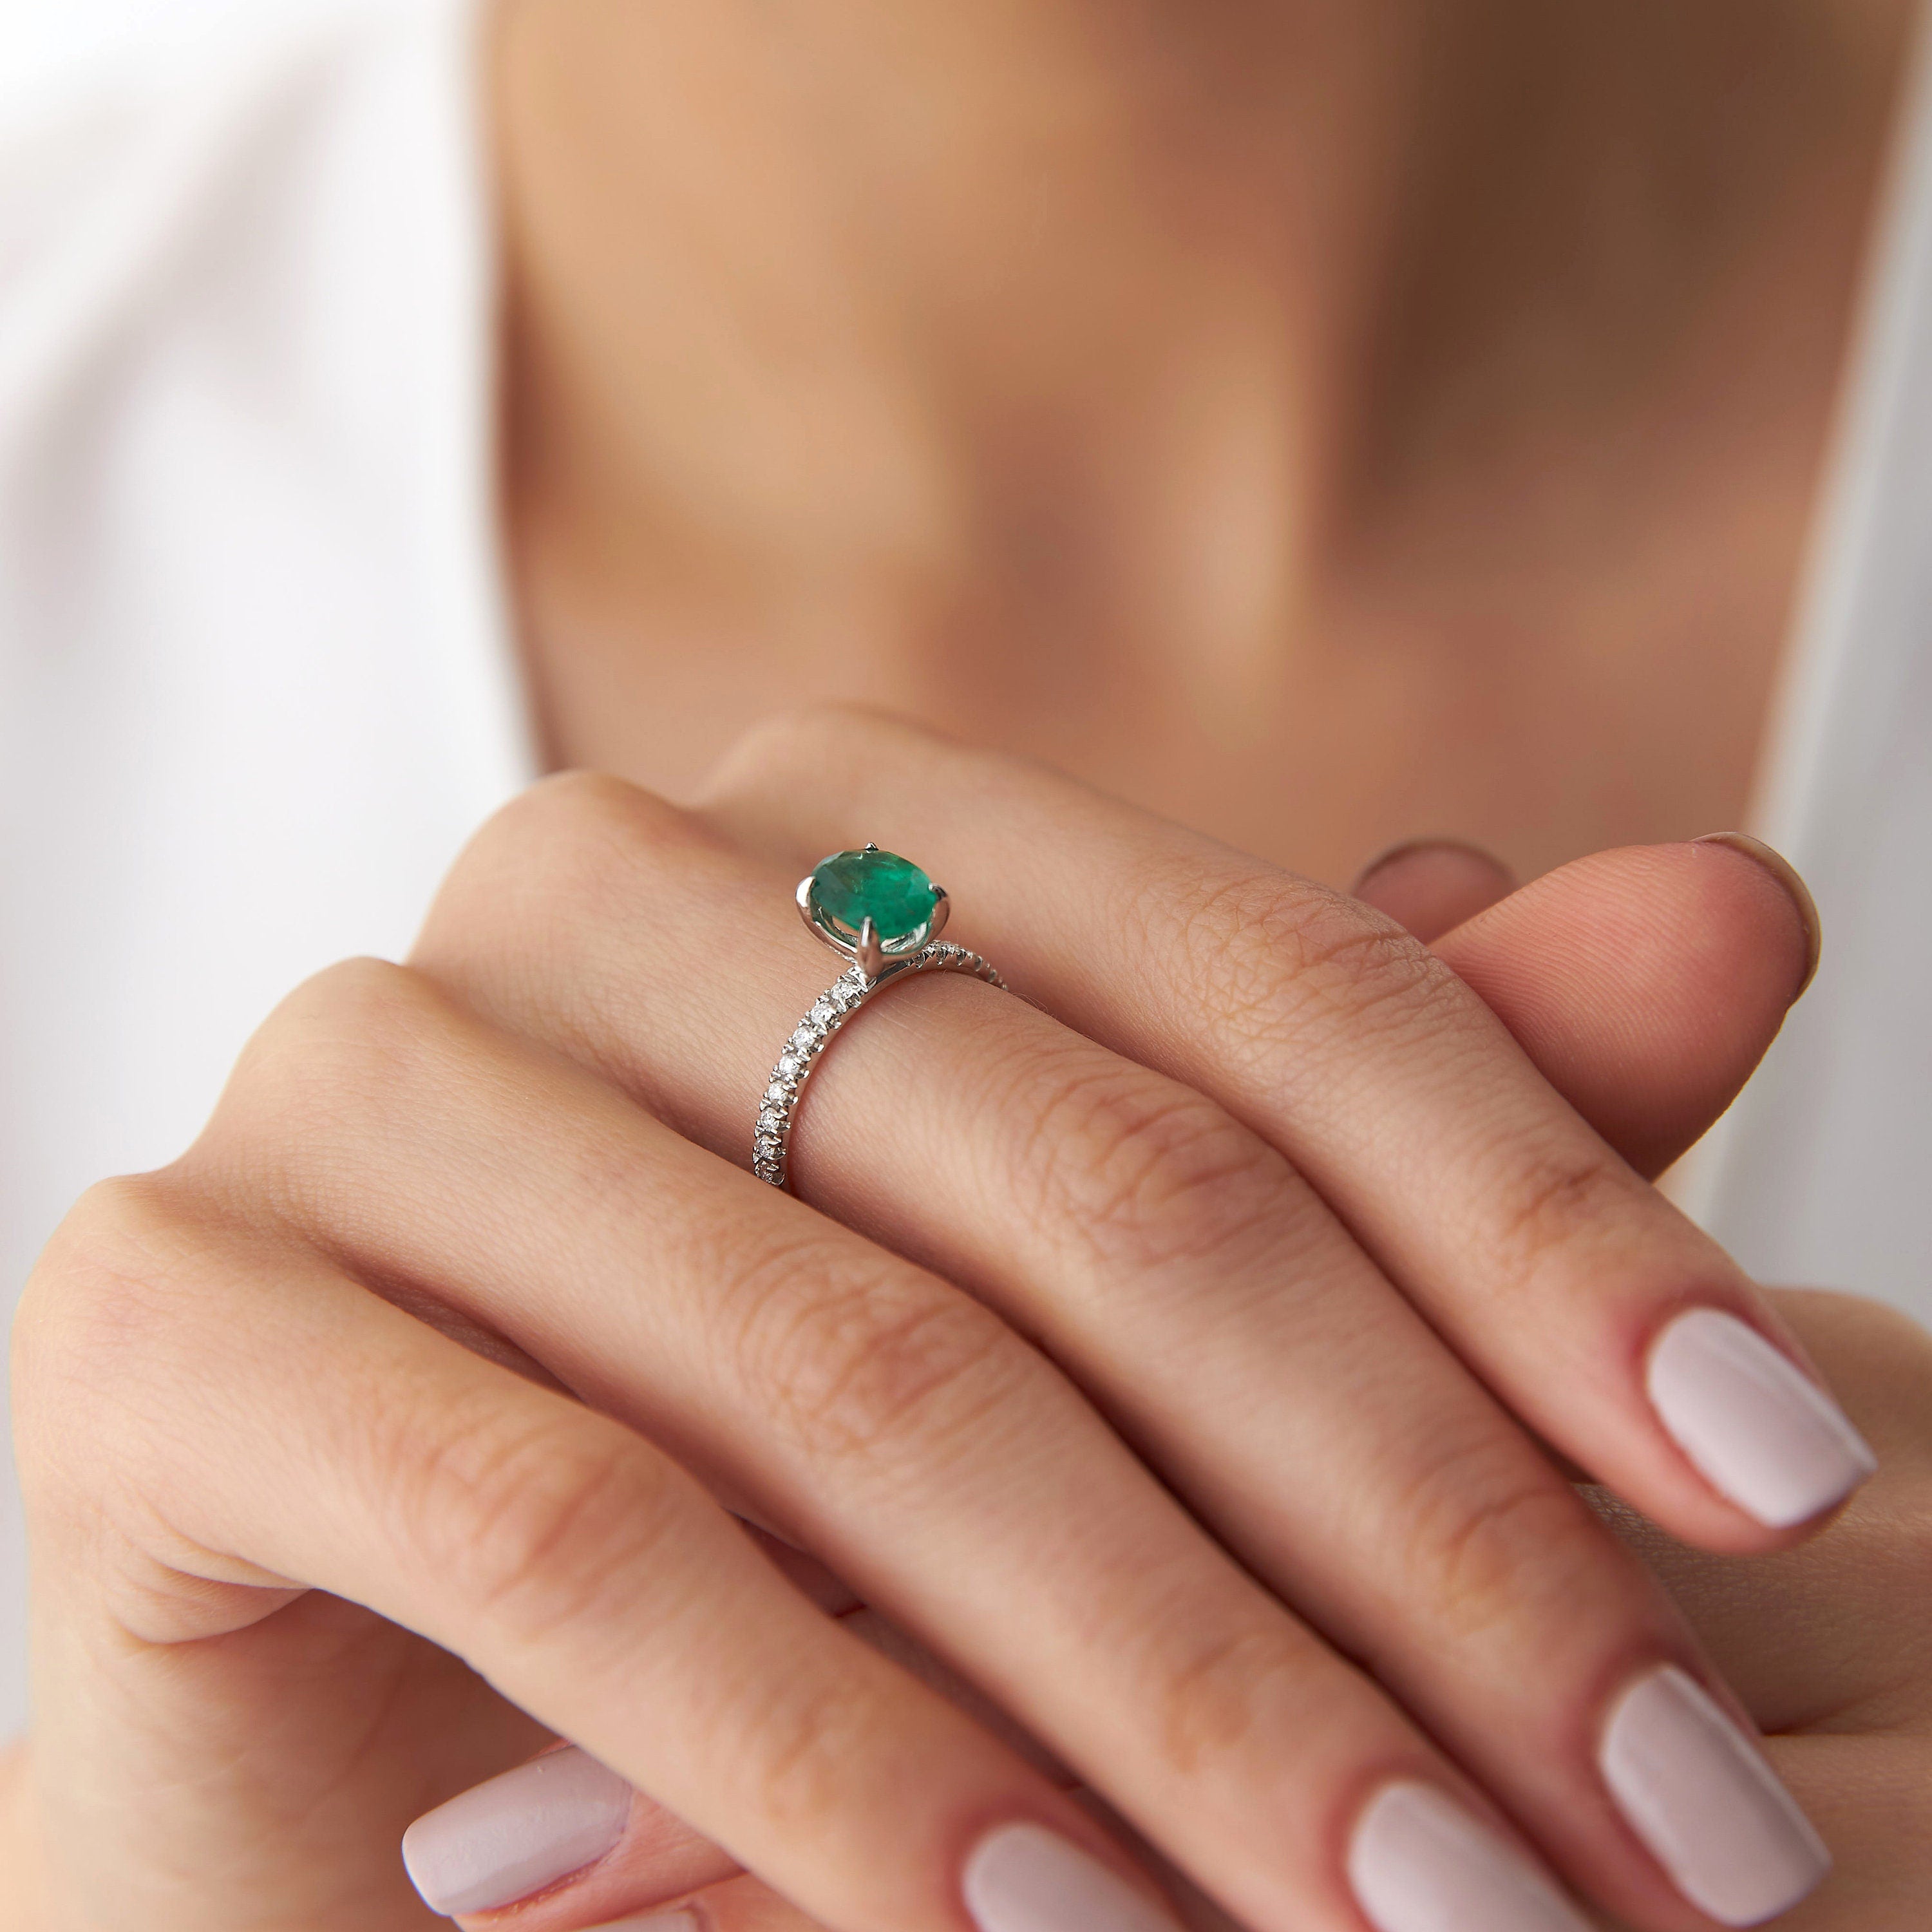 Oval Cut Emerald Solitaire Ring With Diamonds in 18K Gold